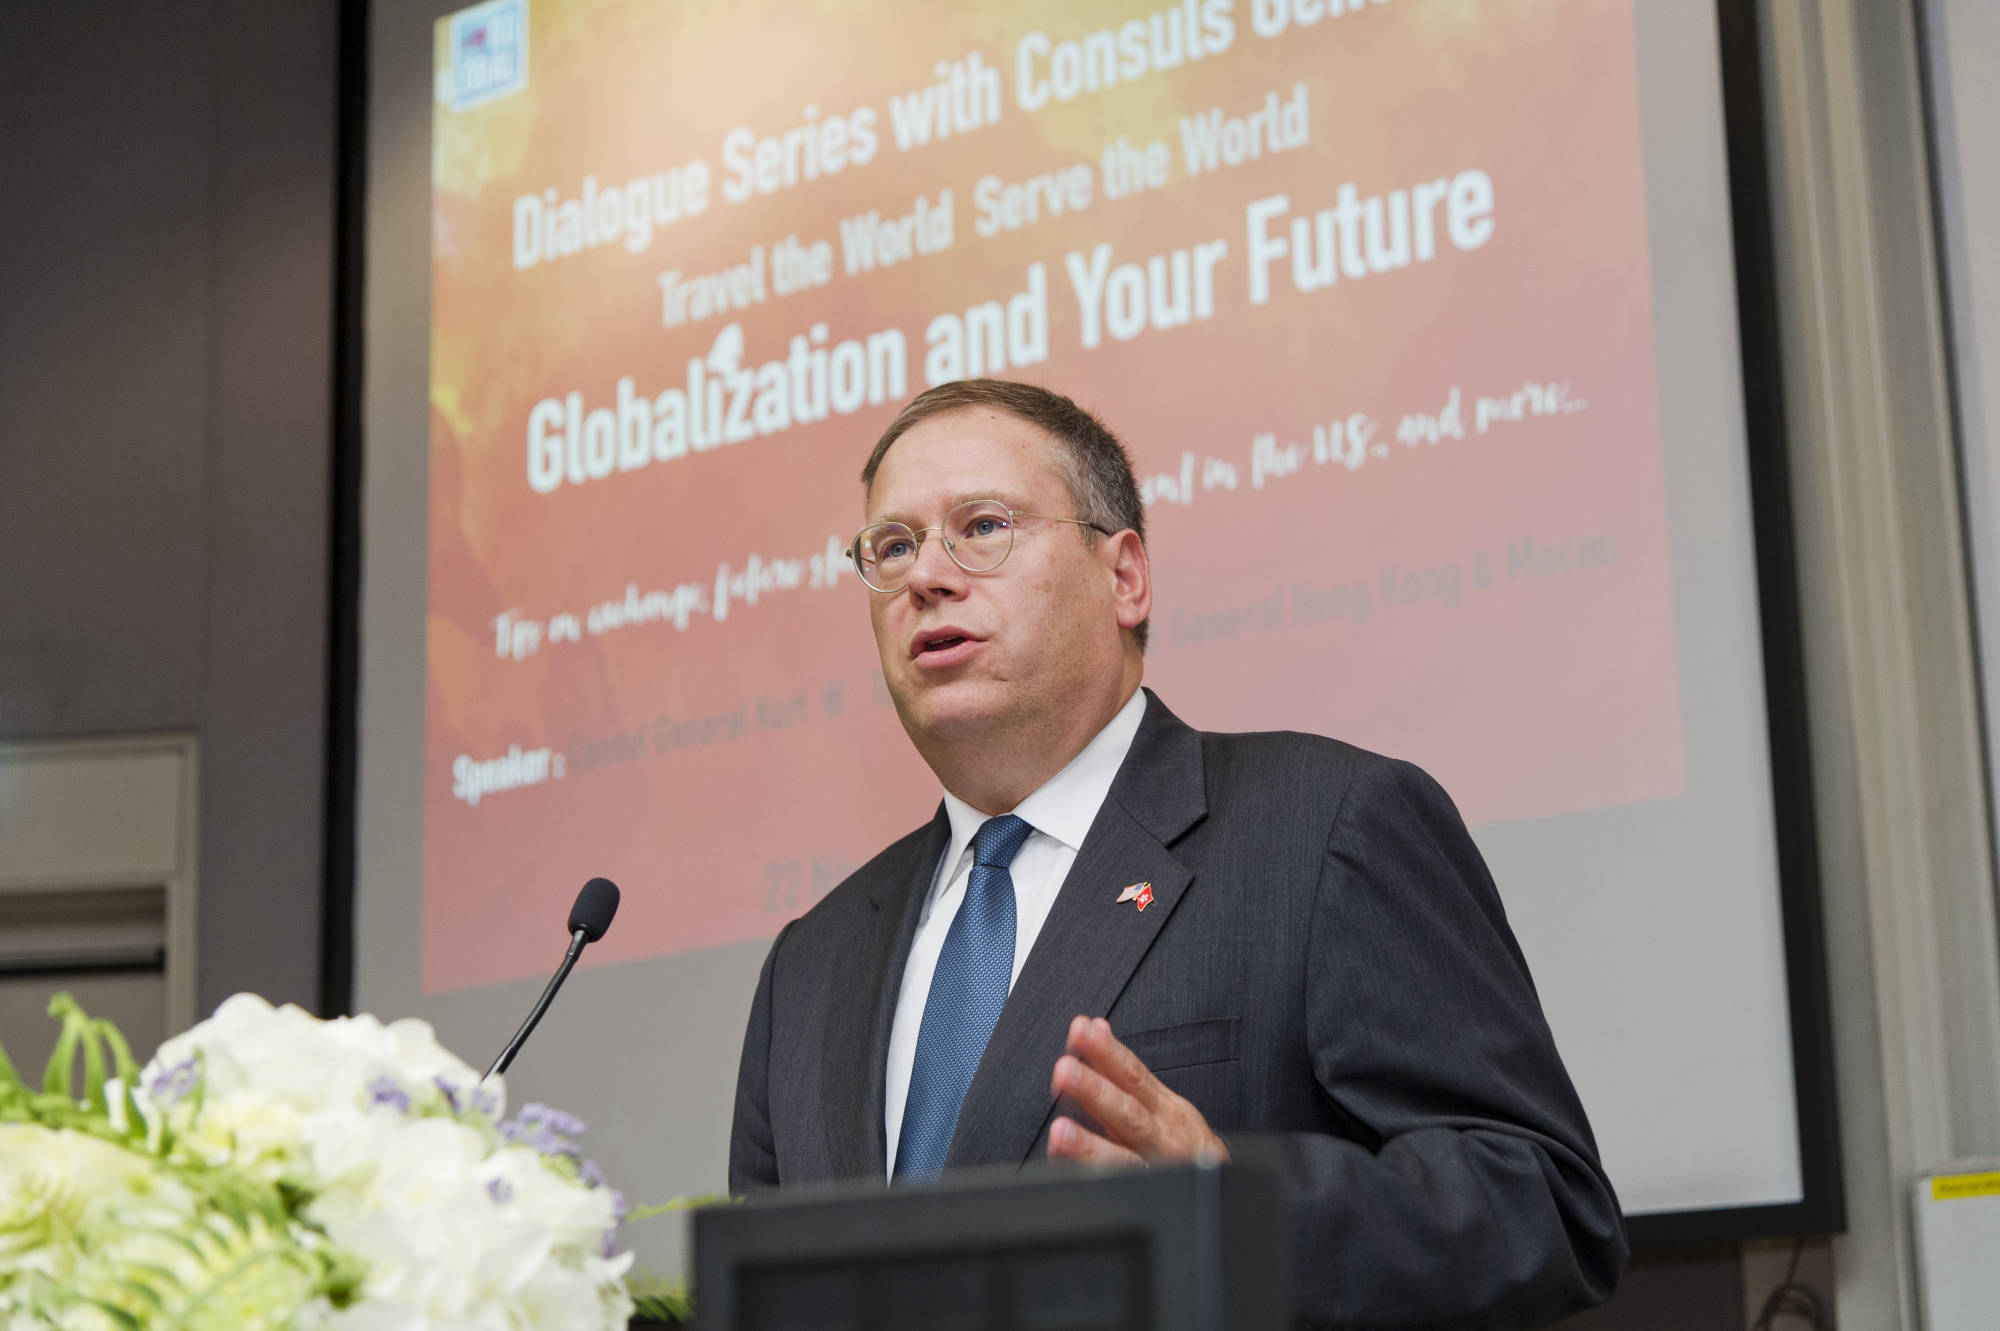 Inaugural Dialogue with U.S. Consul General